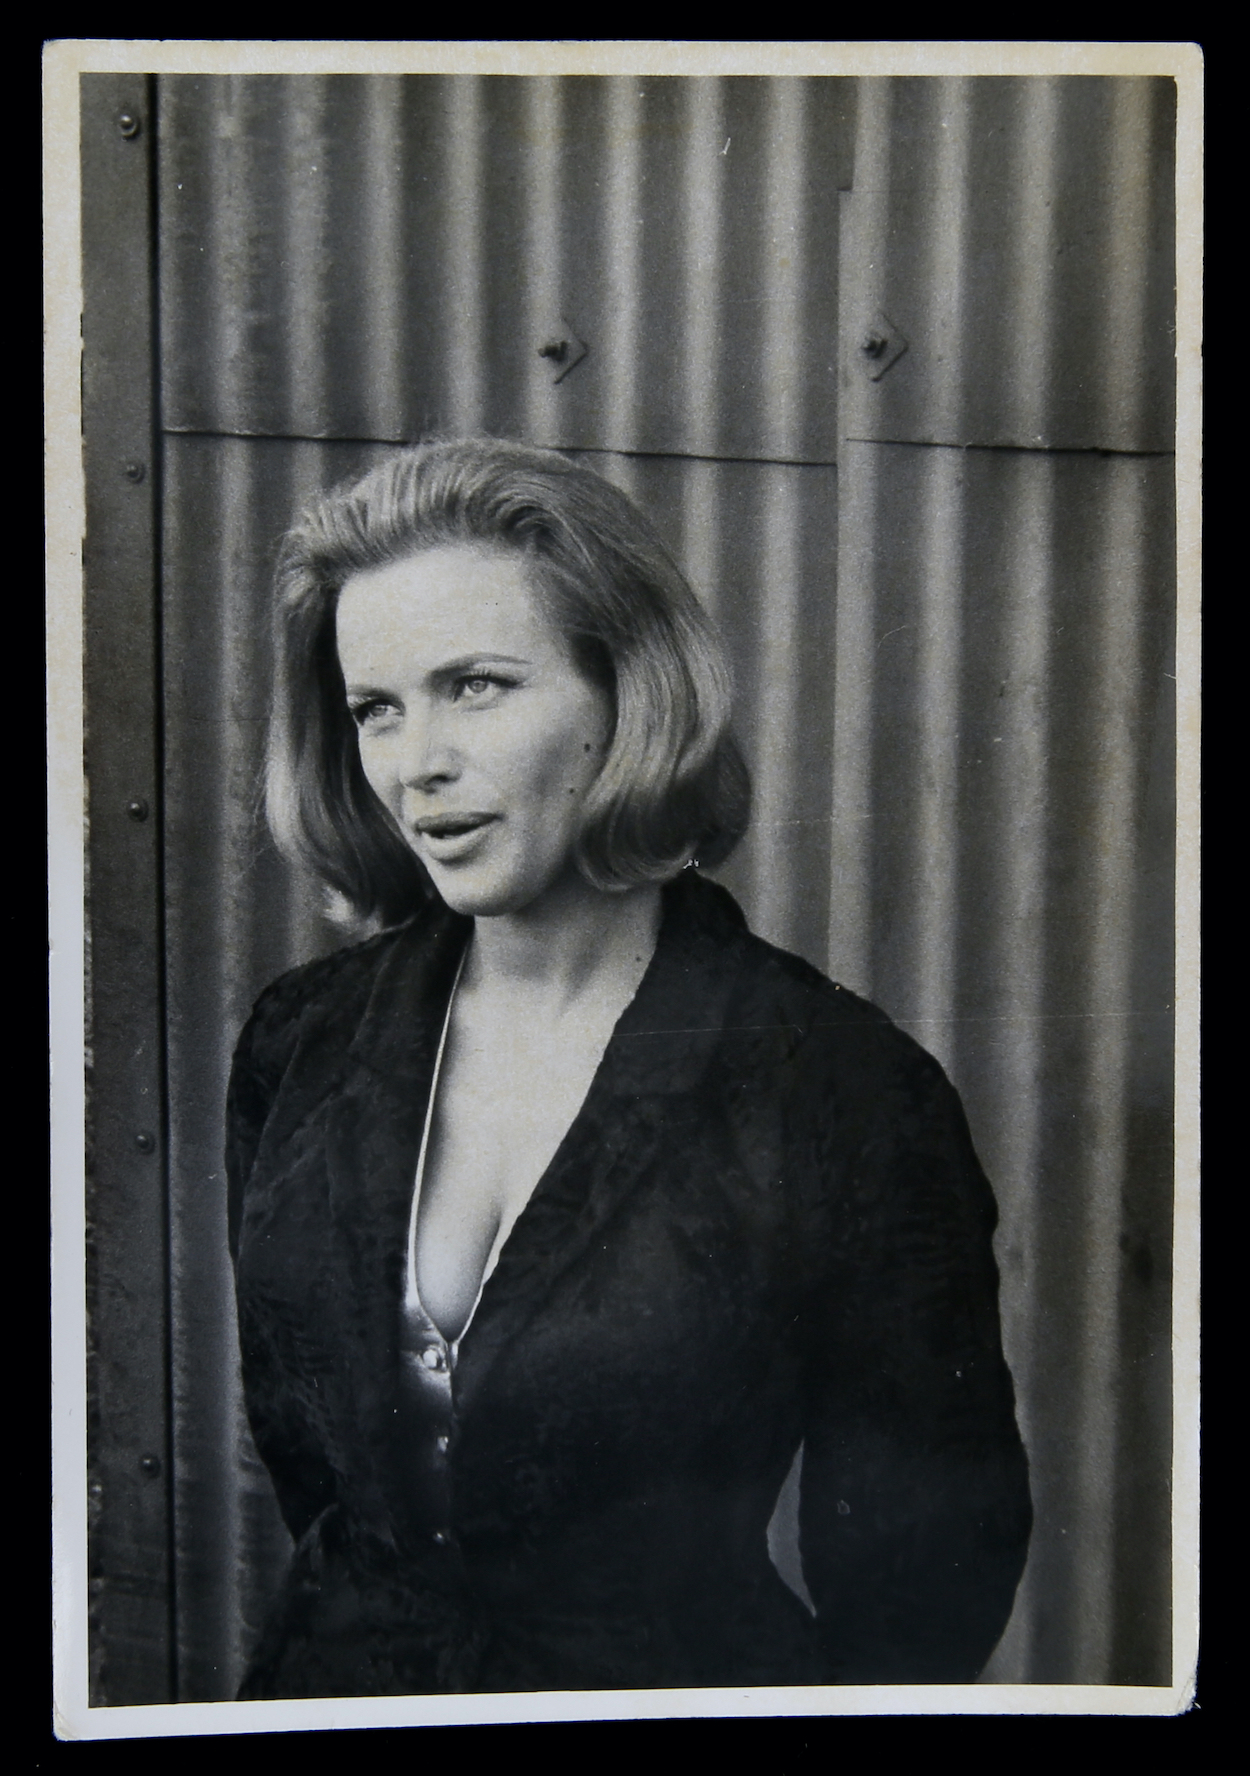 A photograph of Honor Blackman as Pussy Galore in Goldfinger